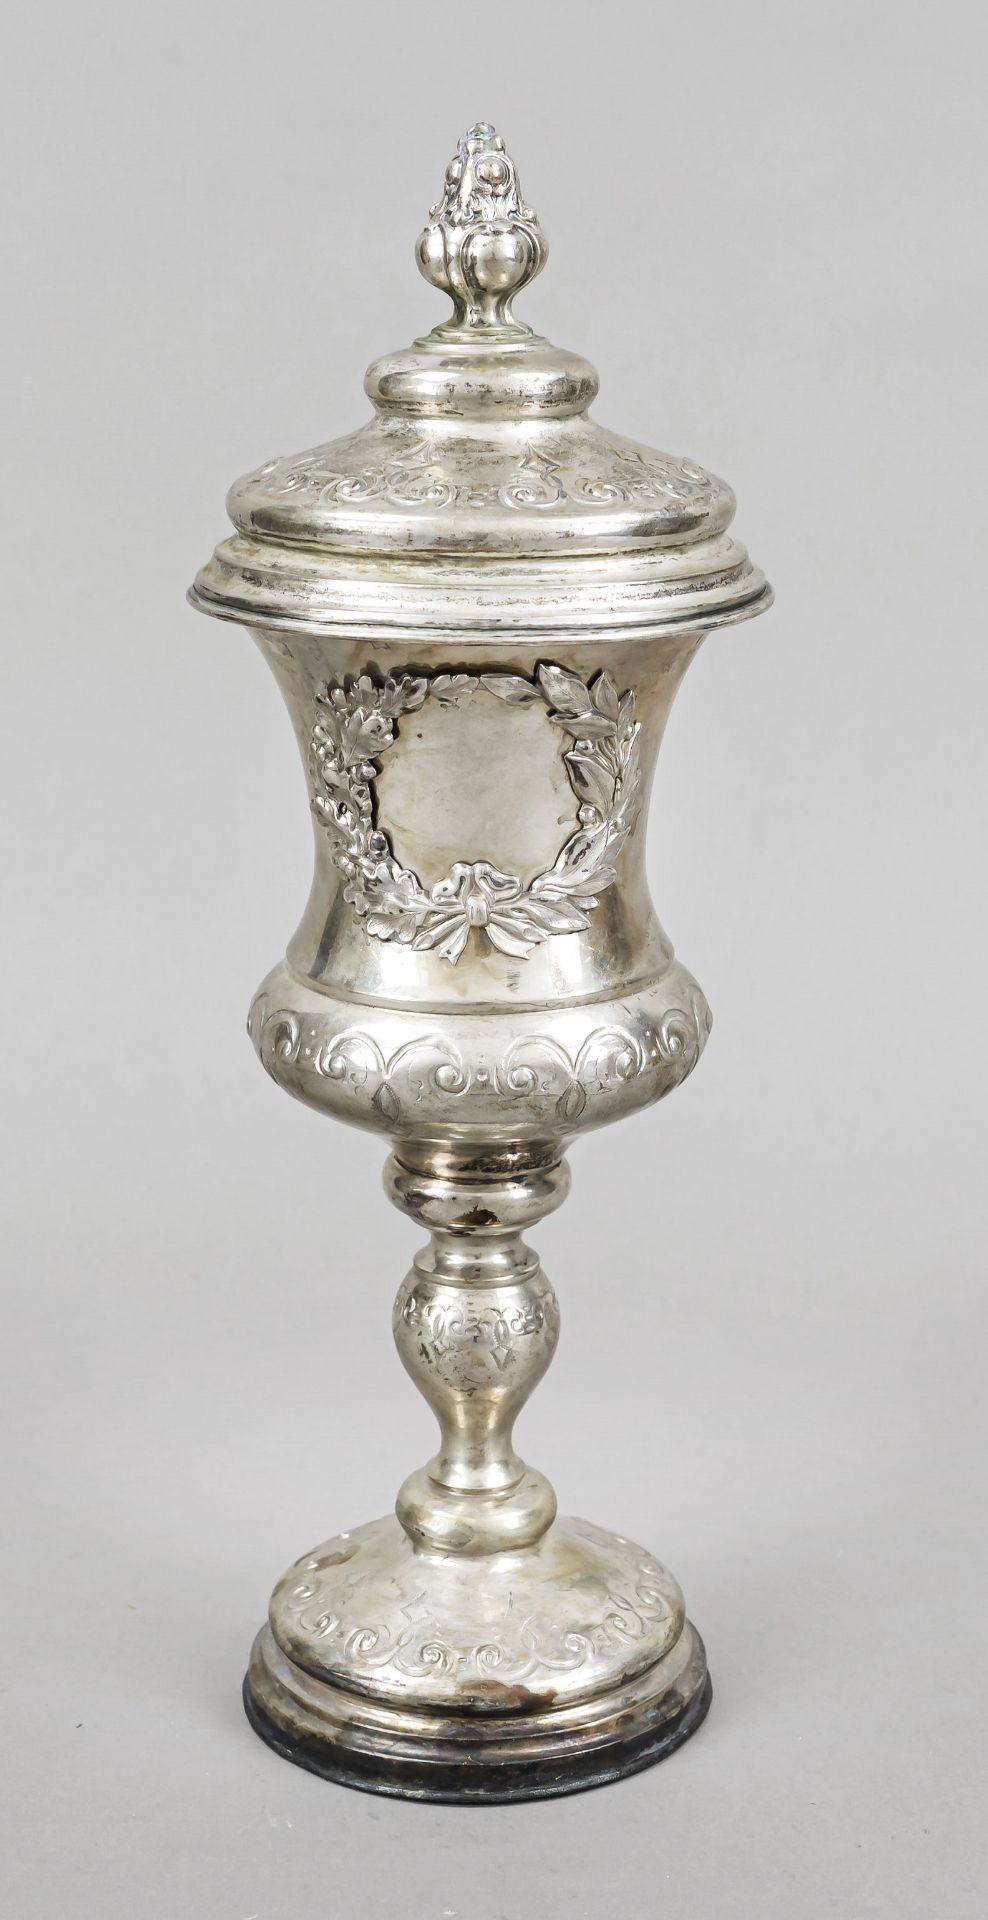 Lidded goblet, c. 1900, silver tested, round domed and filled stand, baluster shaft, domed dome in